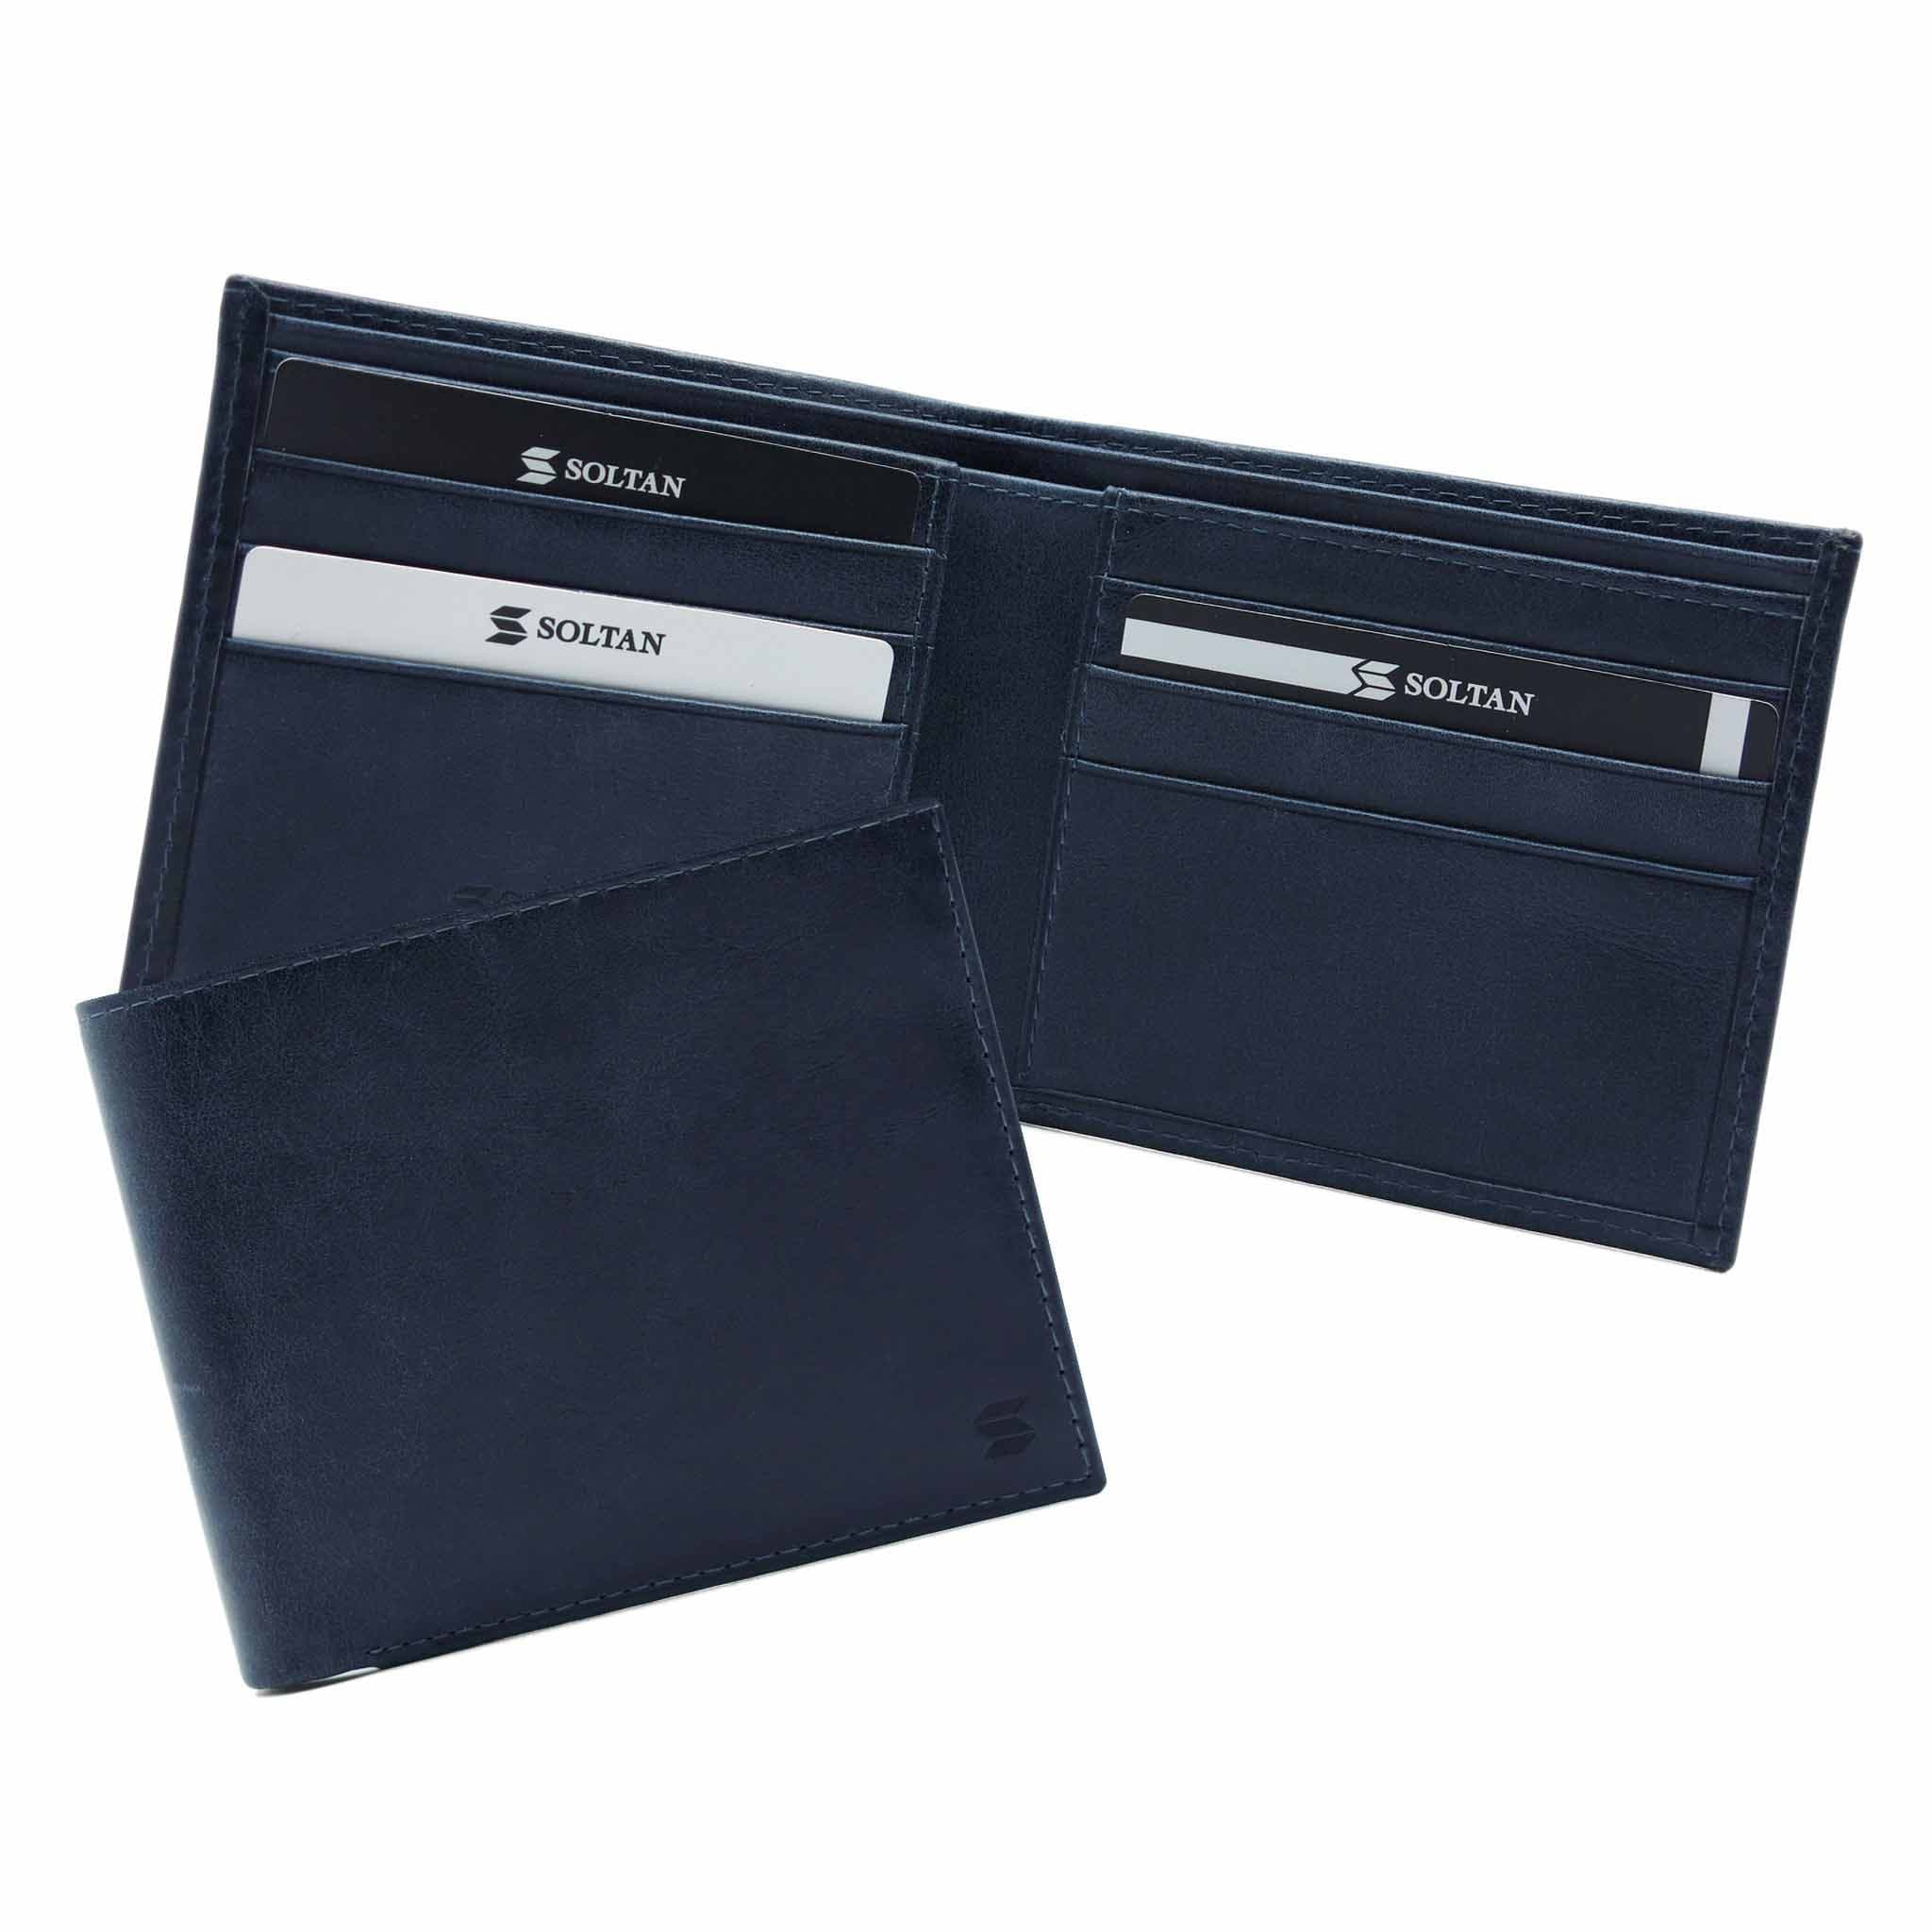 Blue men's wallets made of genuine leather